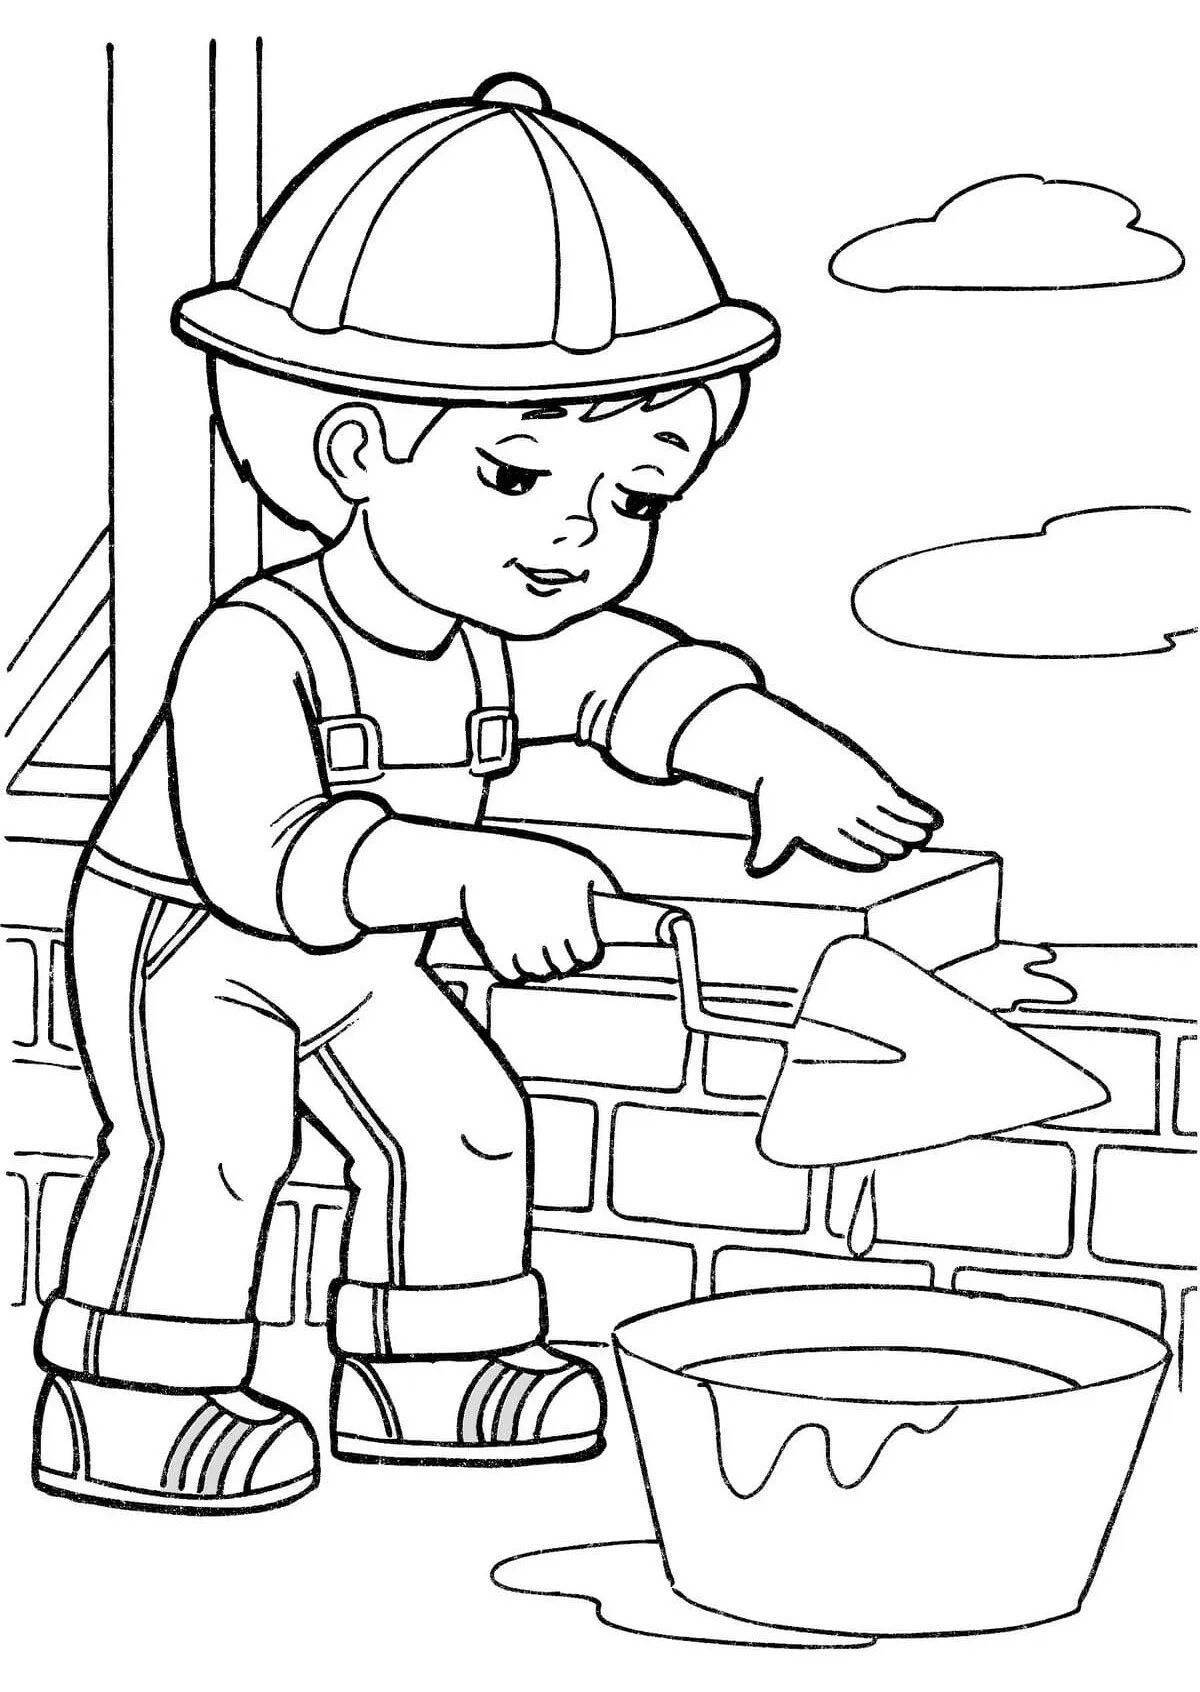 Creative coloring world of professions for kids